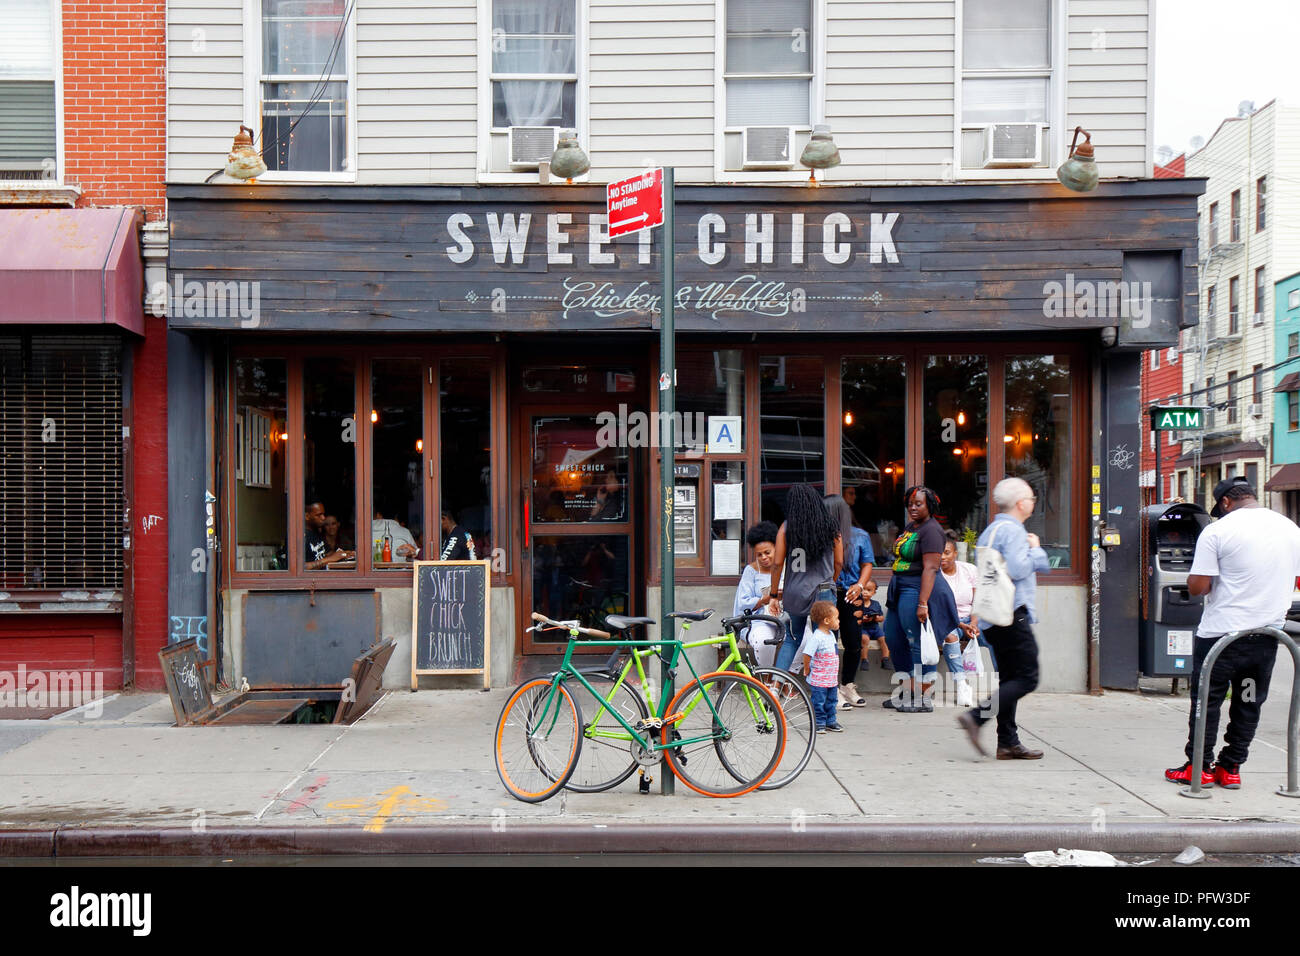 Sweet Chick, 164 Bedford Ave, Brooklyn, NY. exterior of a southern fried chicken and waffles restaurant in the Williamsburg neighborhood. Stock Photo